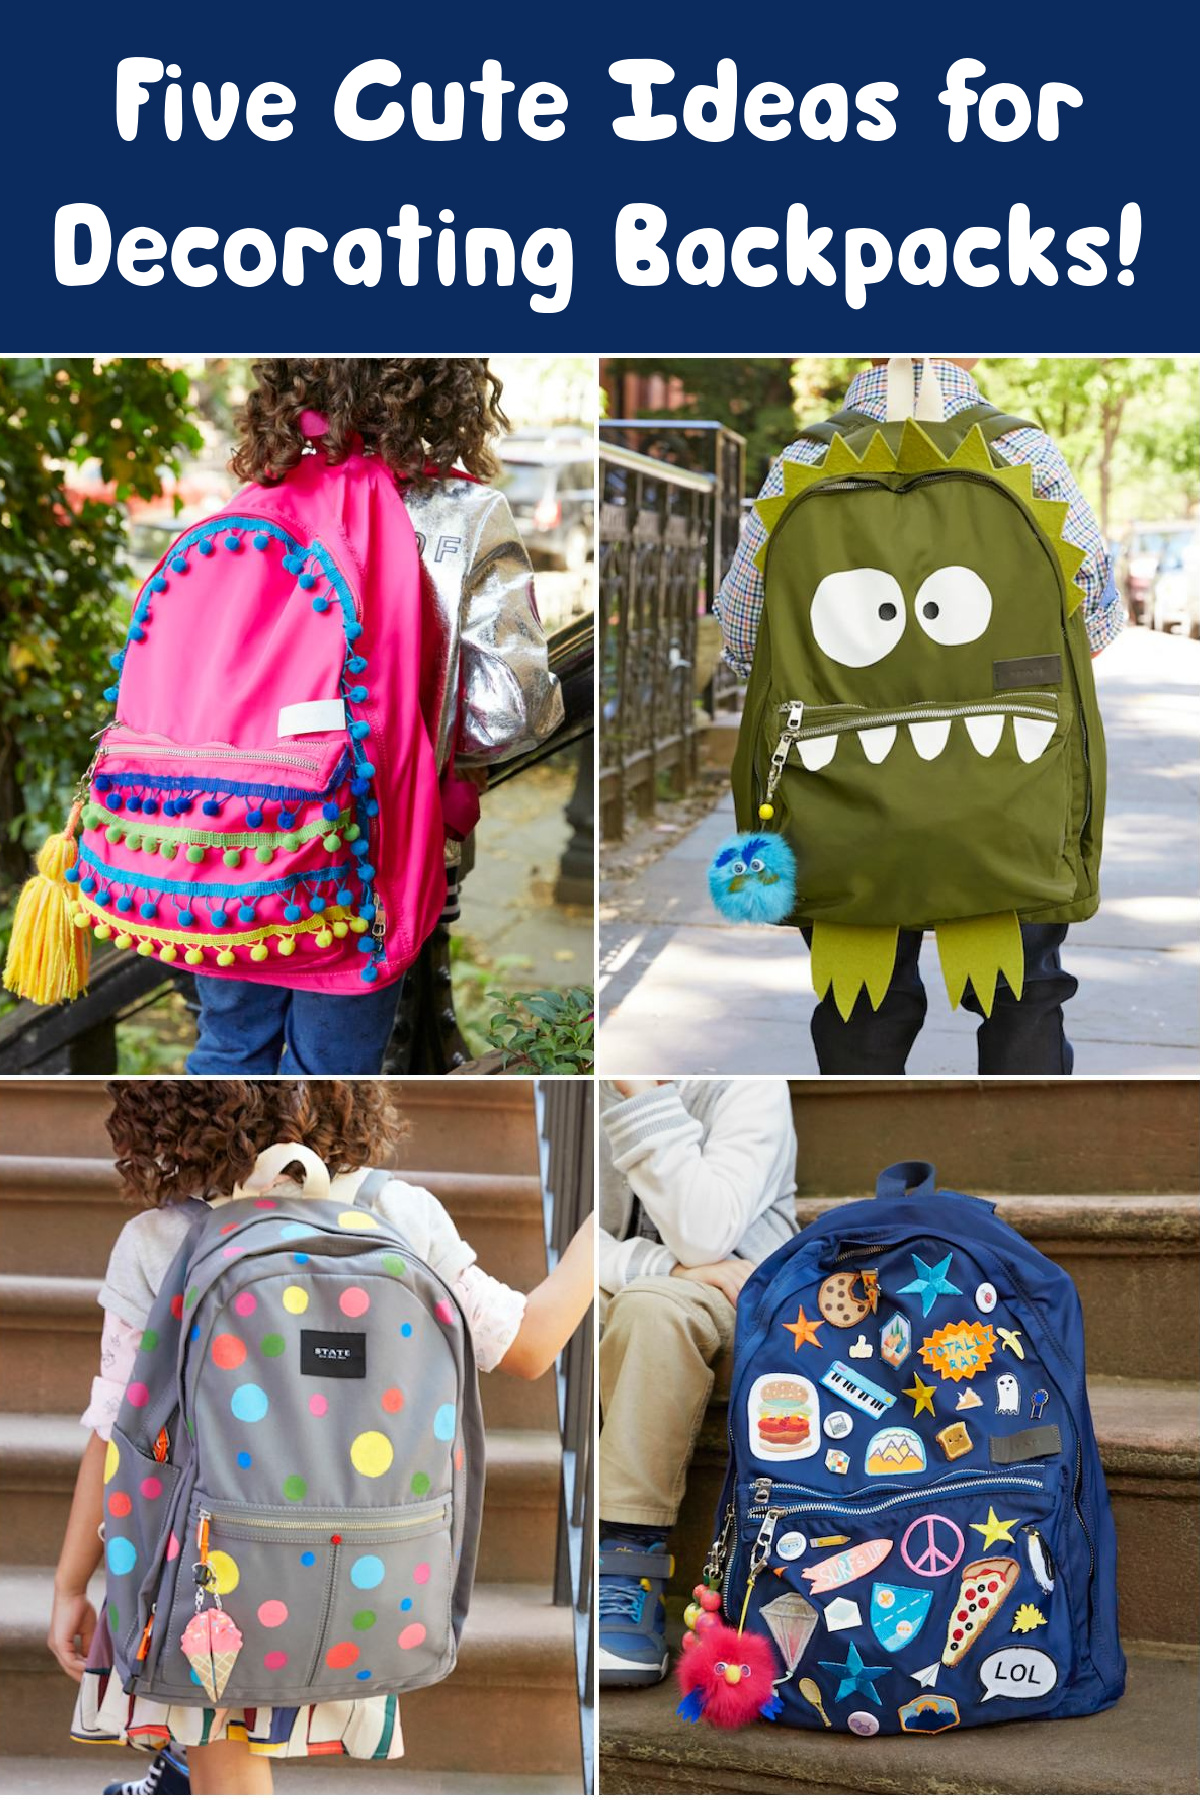 Five-Cute-Ideas-for-Decorating-Backpacks